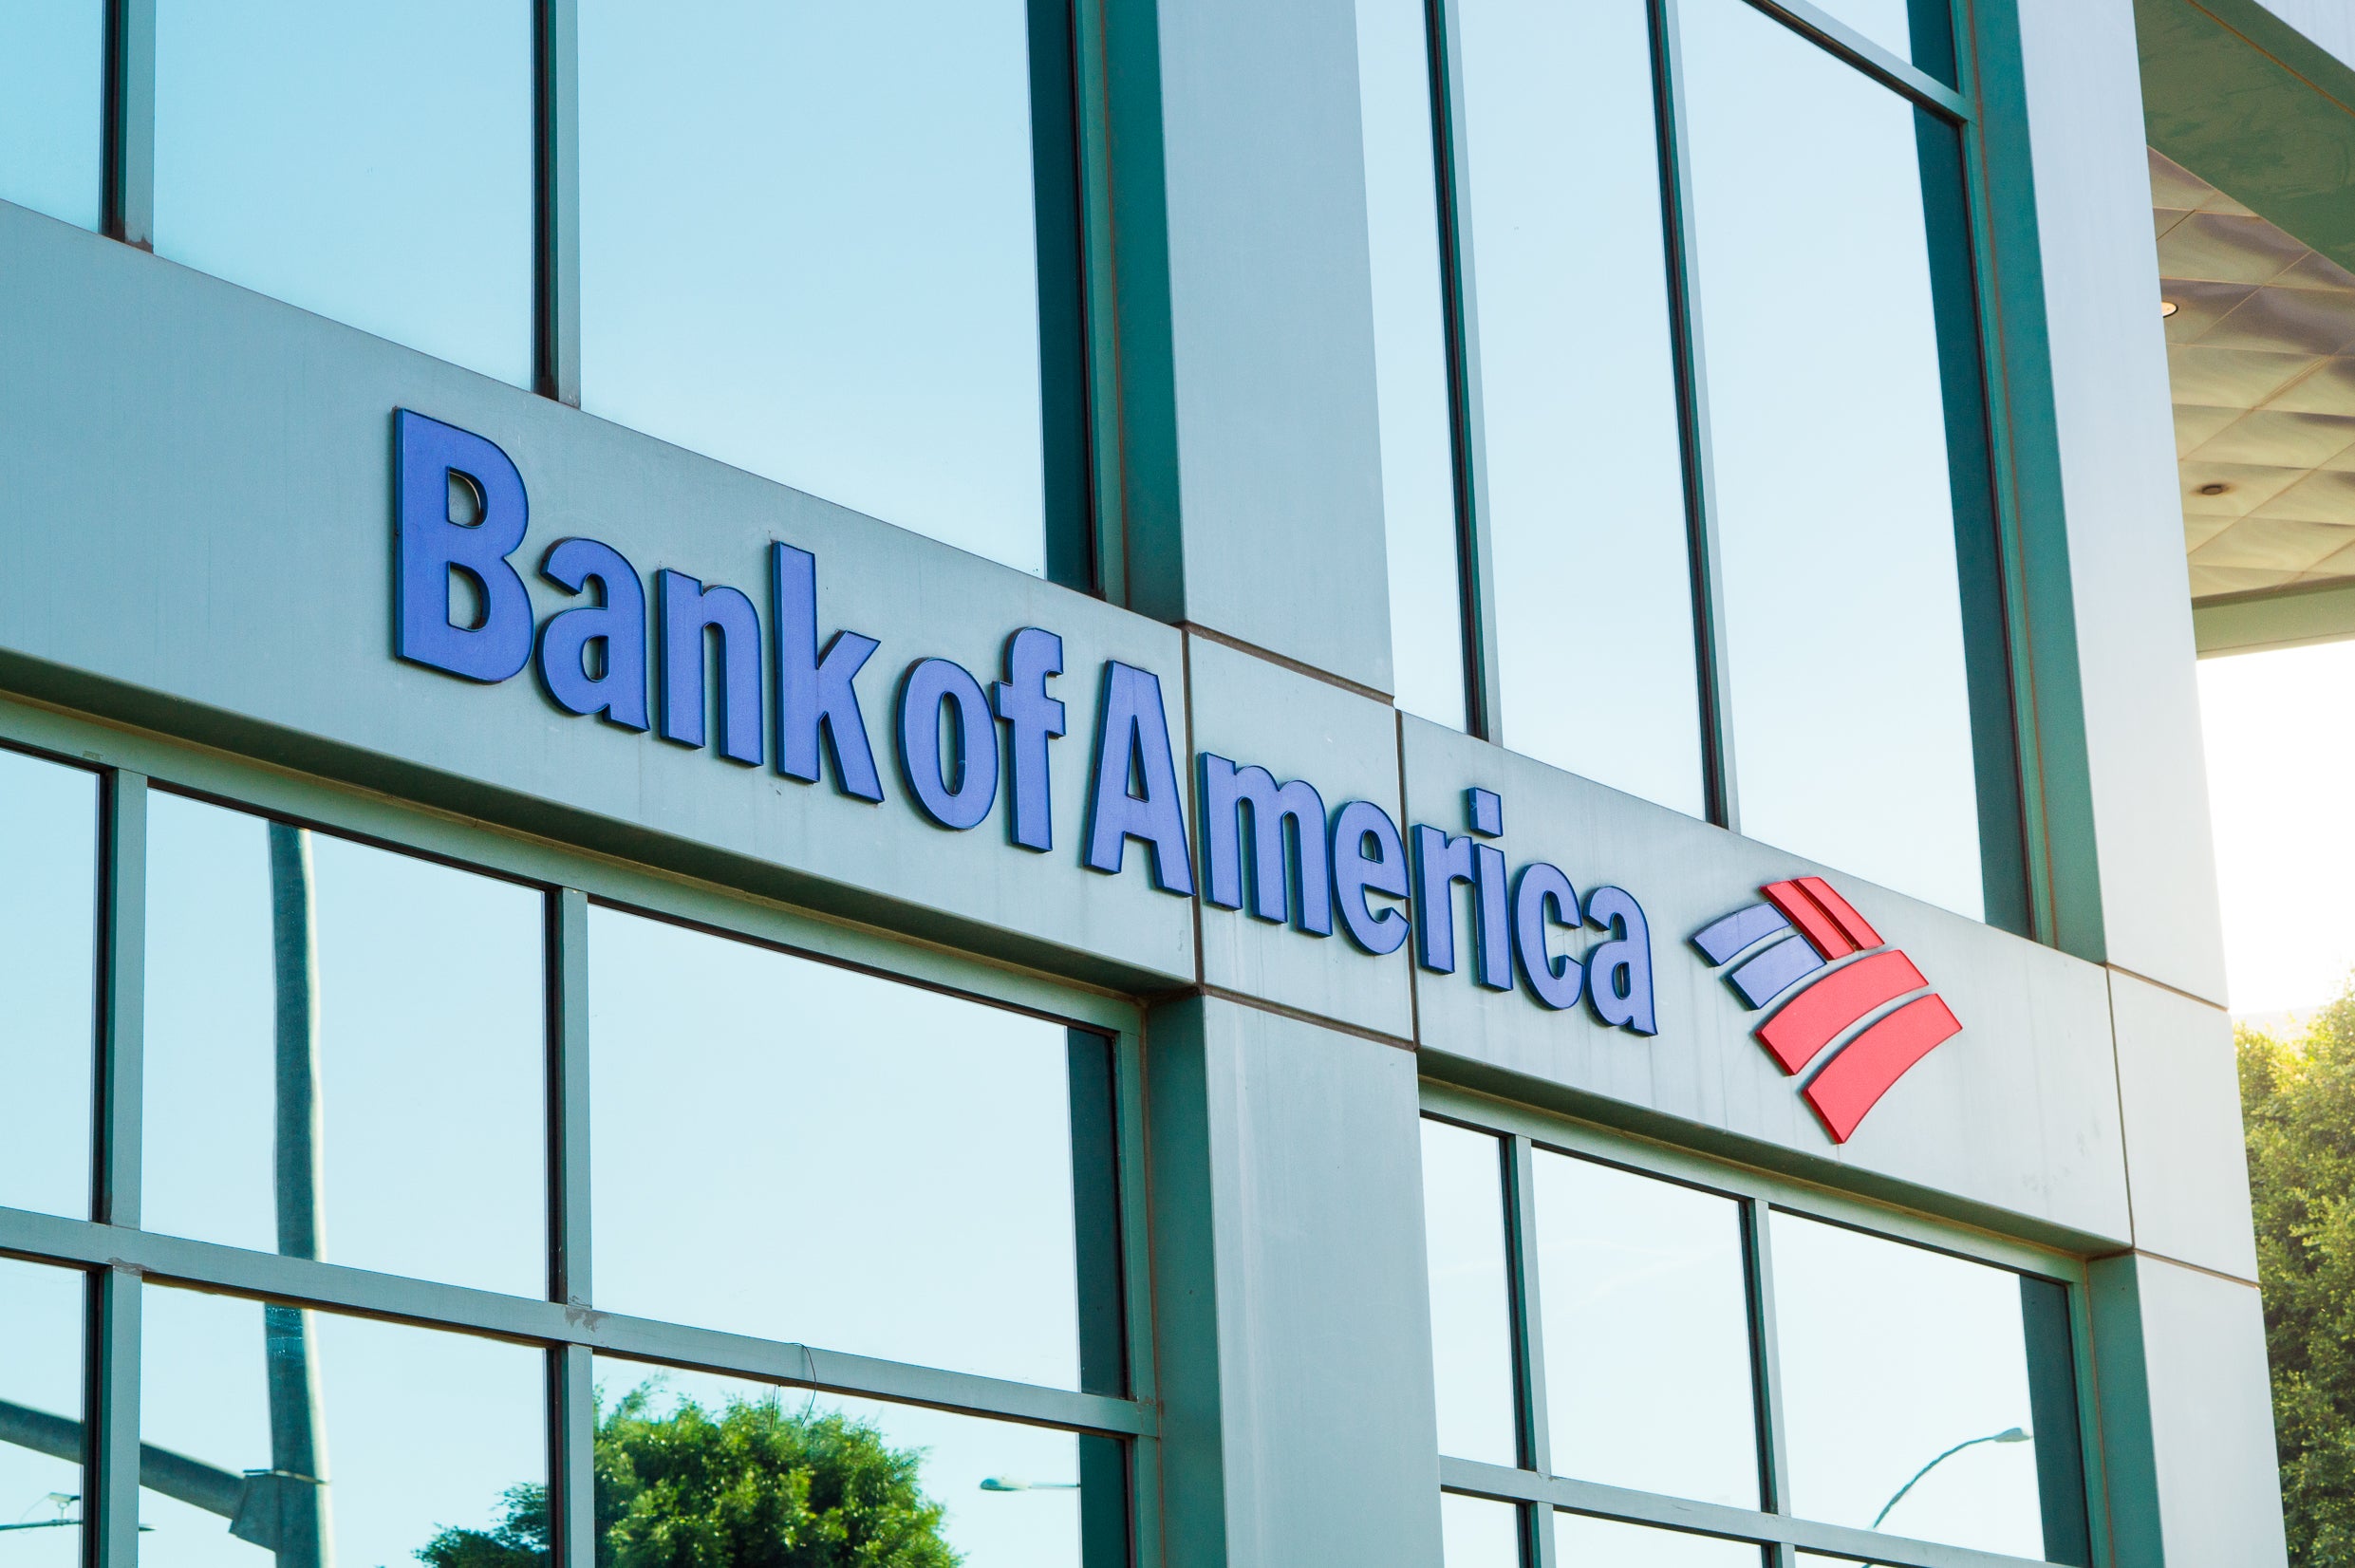 Bank of America sign on building